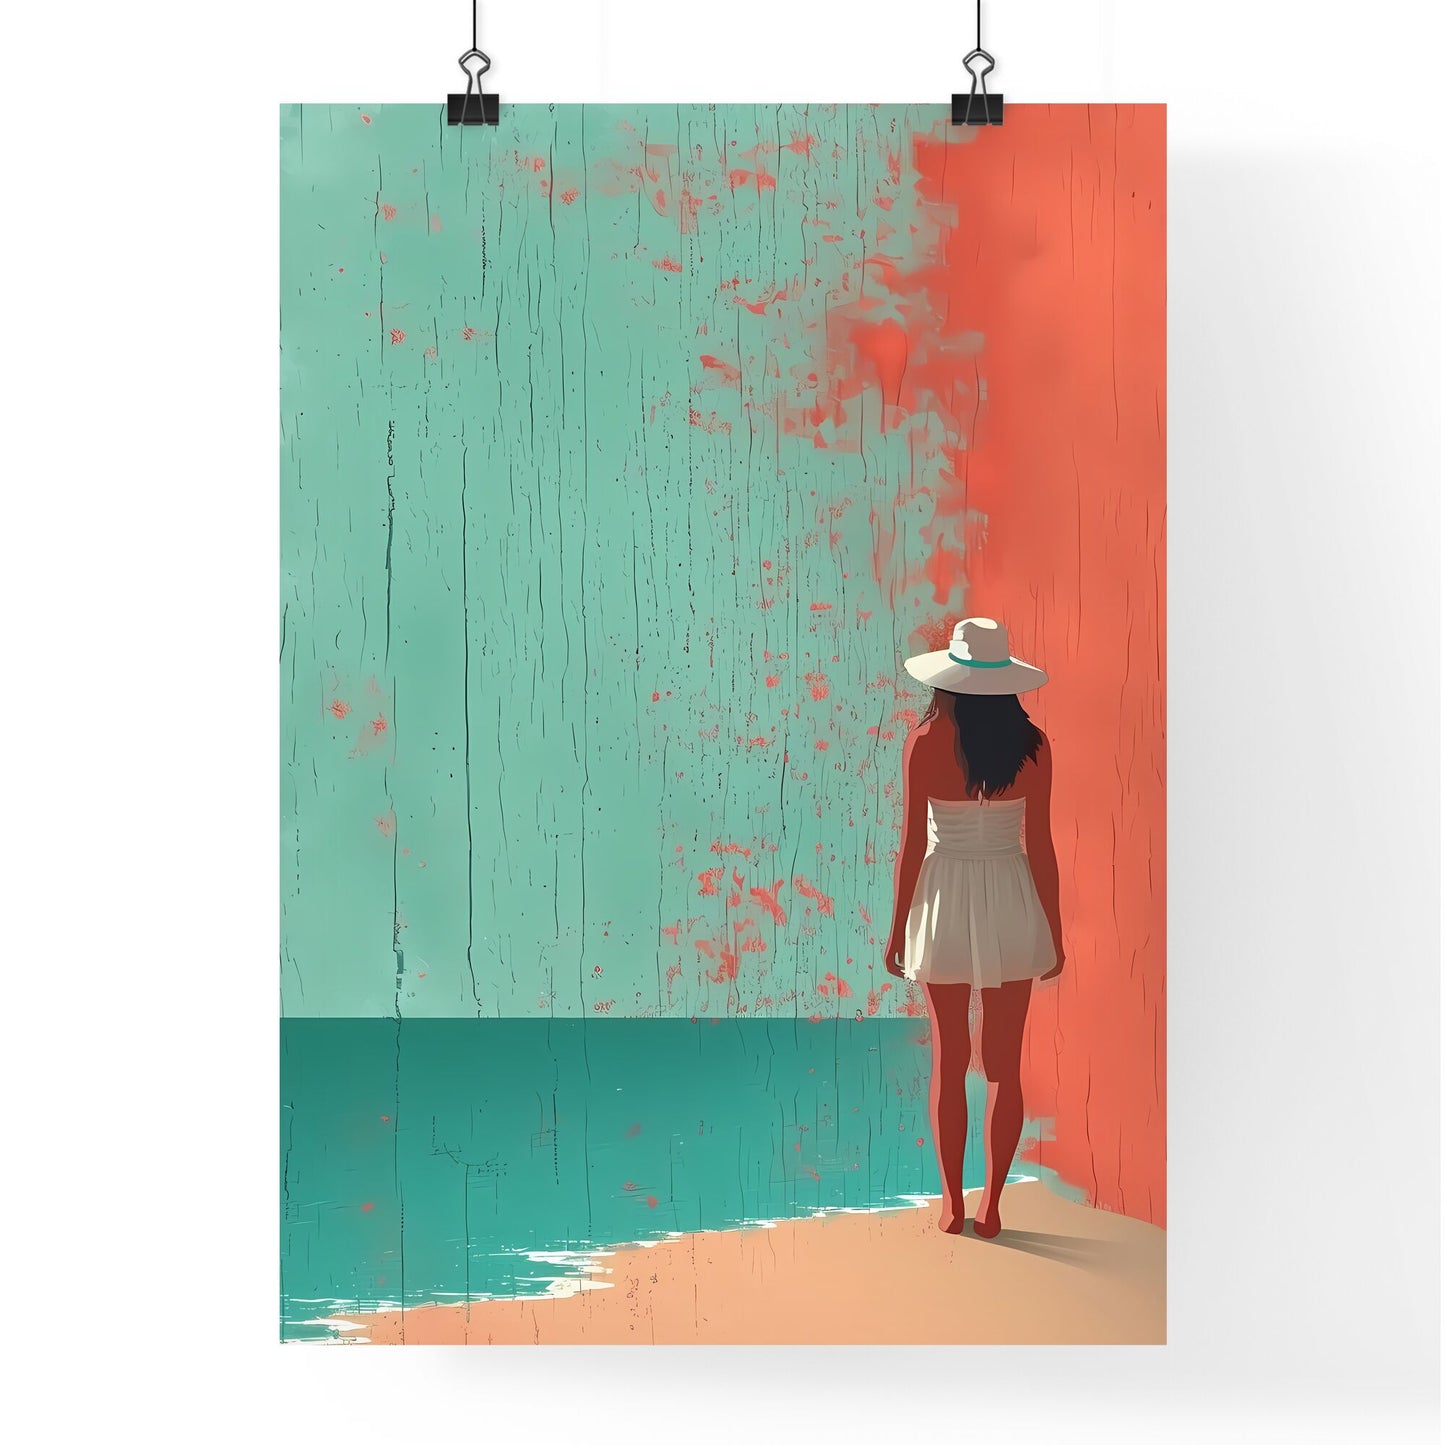 Illustration of International Labor Day - Art print of a woman in a white dress and hat standing on a rock Default Title